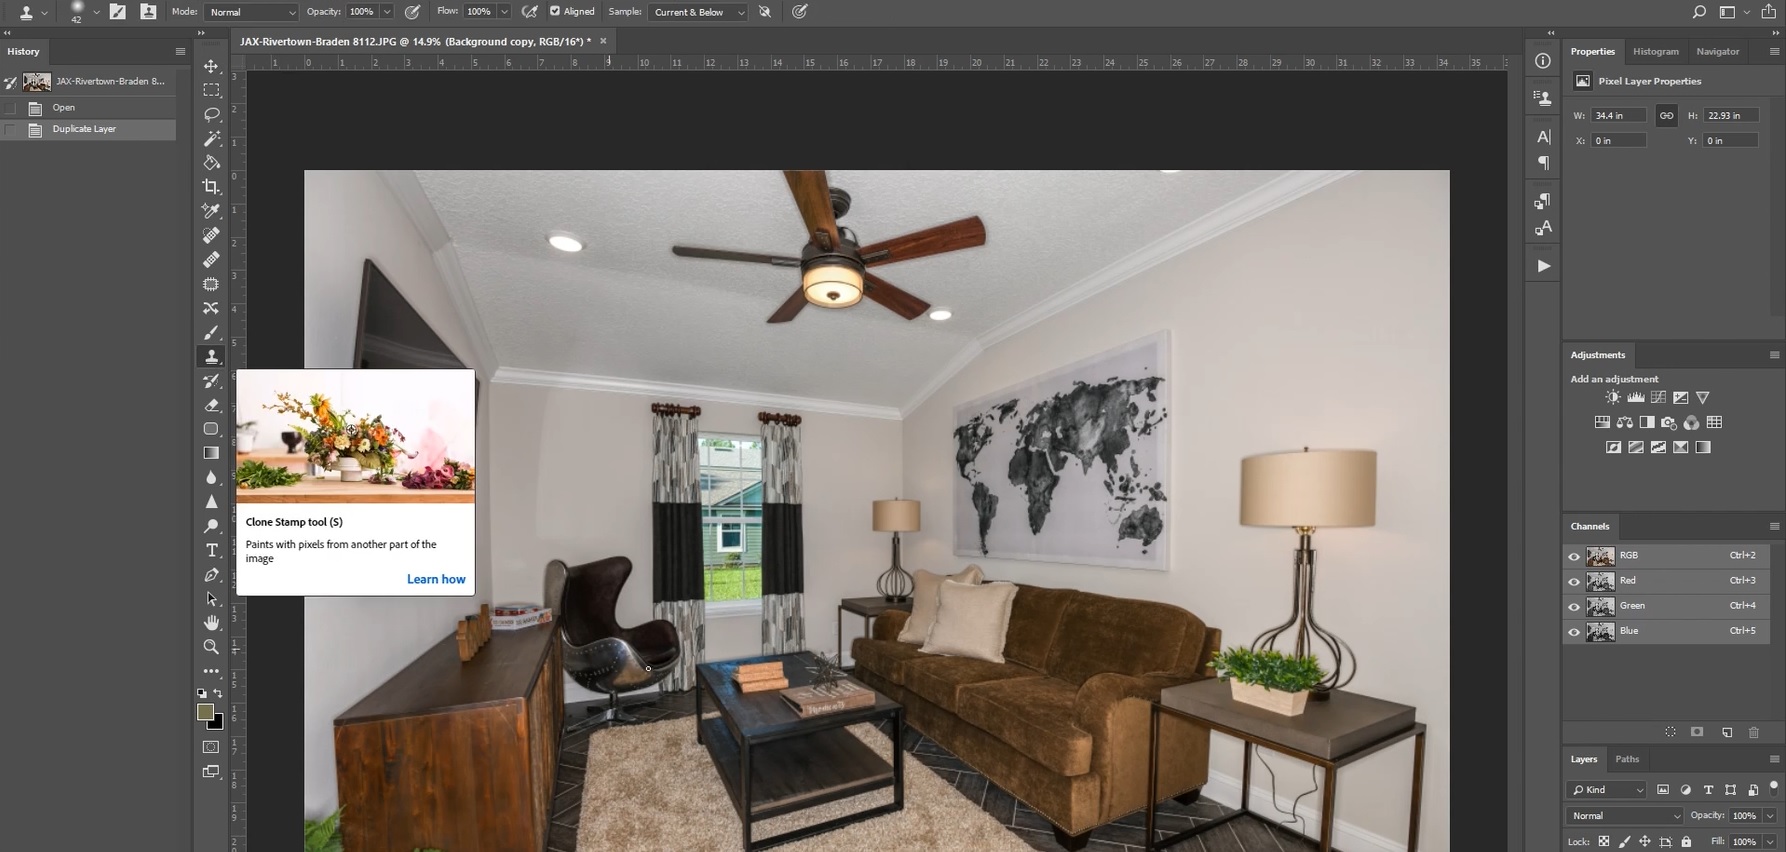 How to Remove Annoying Cords Using Photoshop